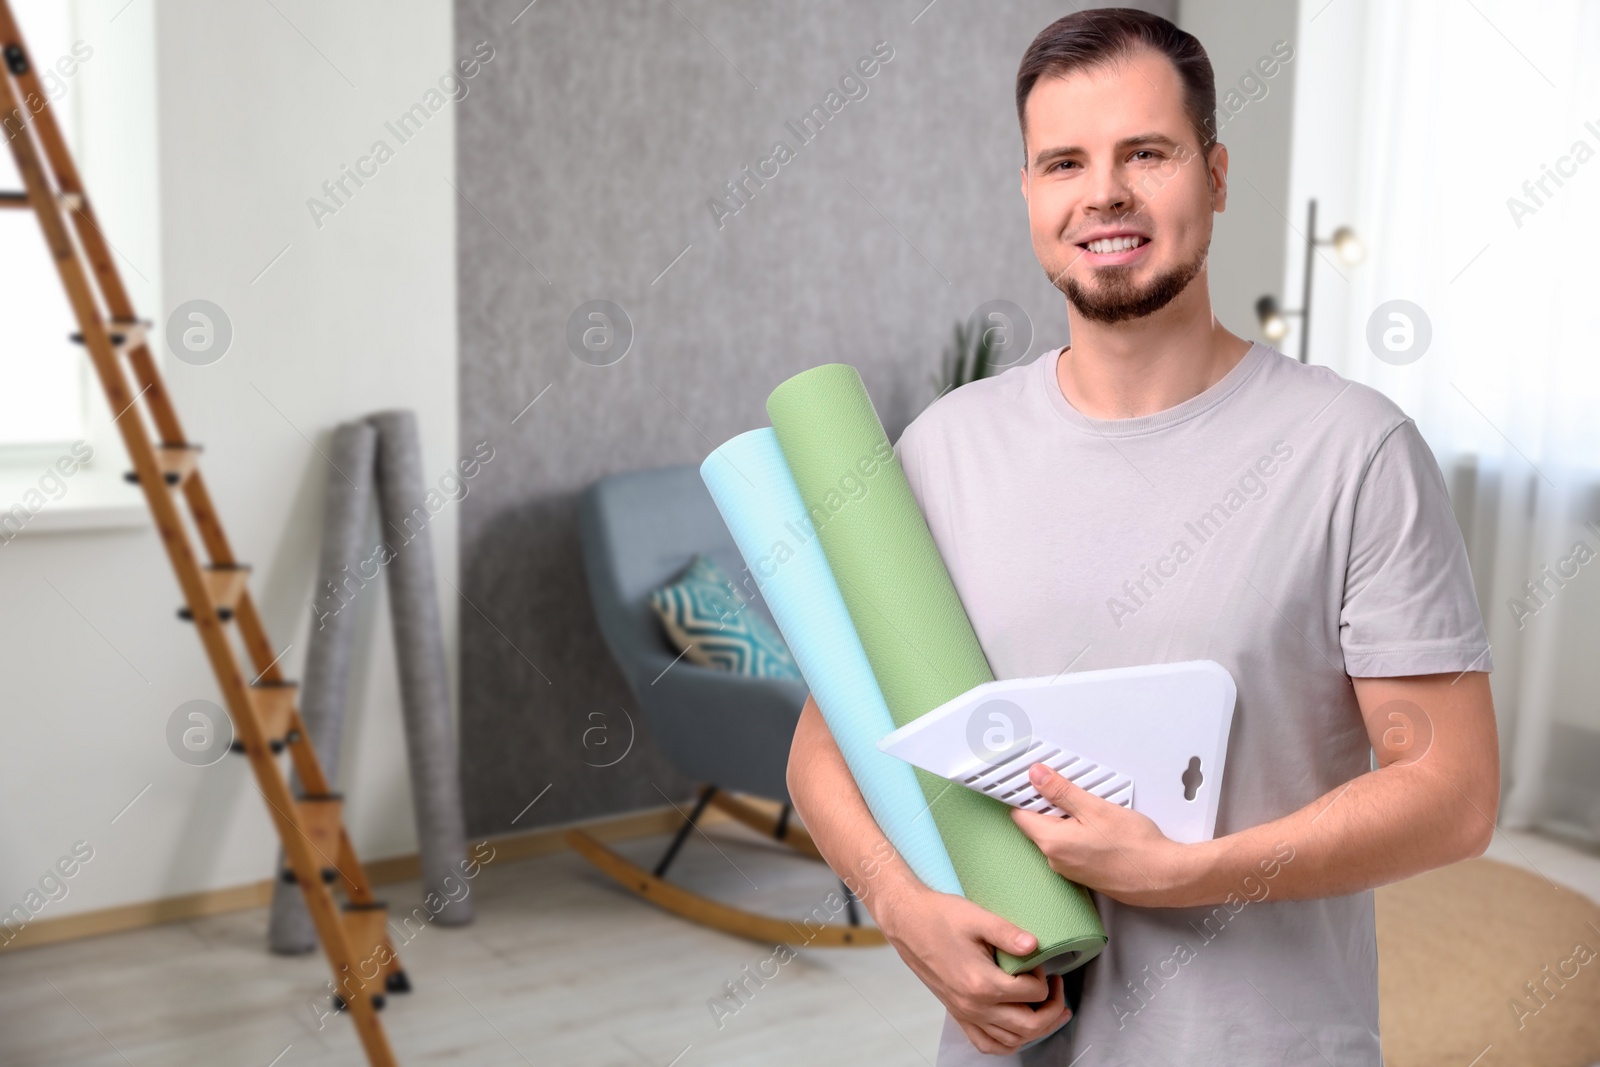 Image of Man with wallpaper rolls and smoothing tool in room